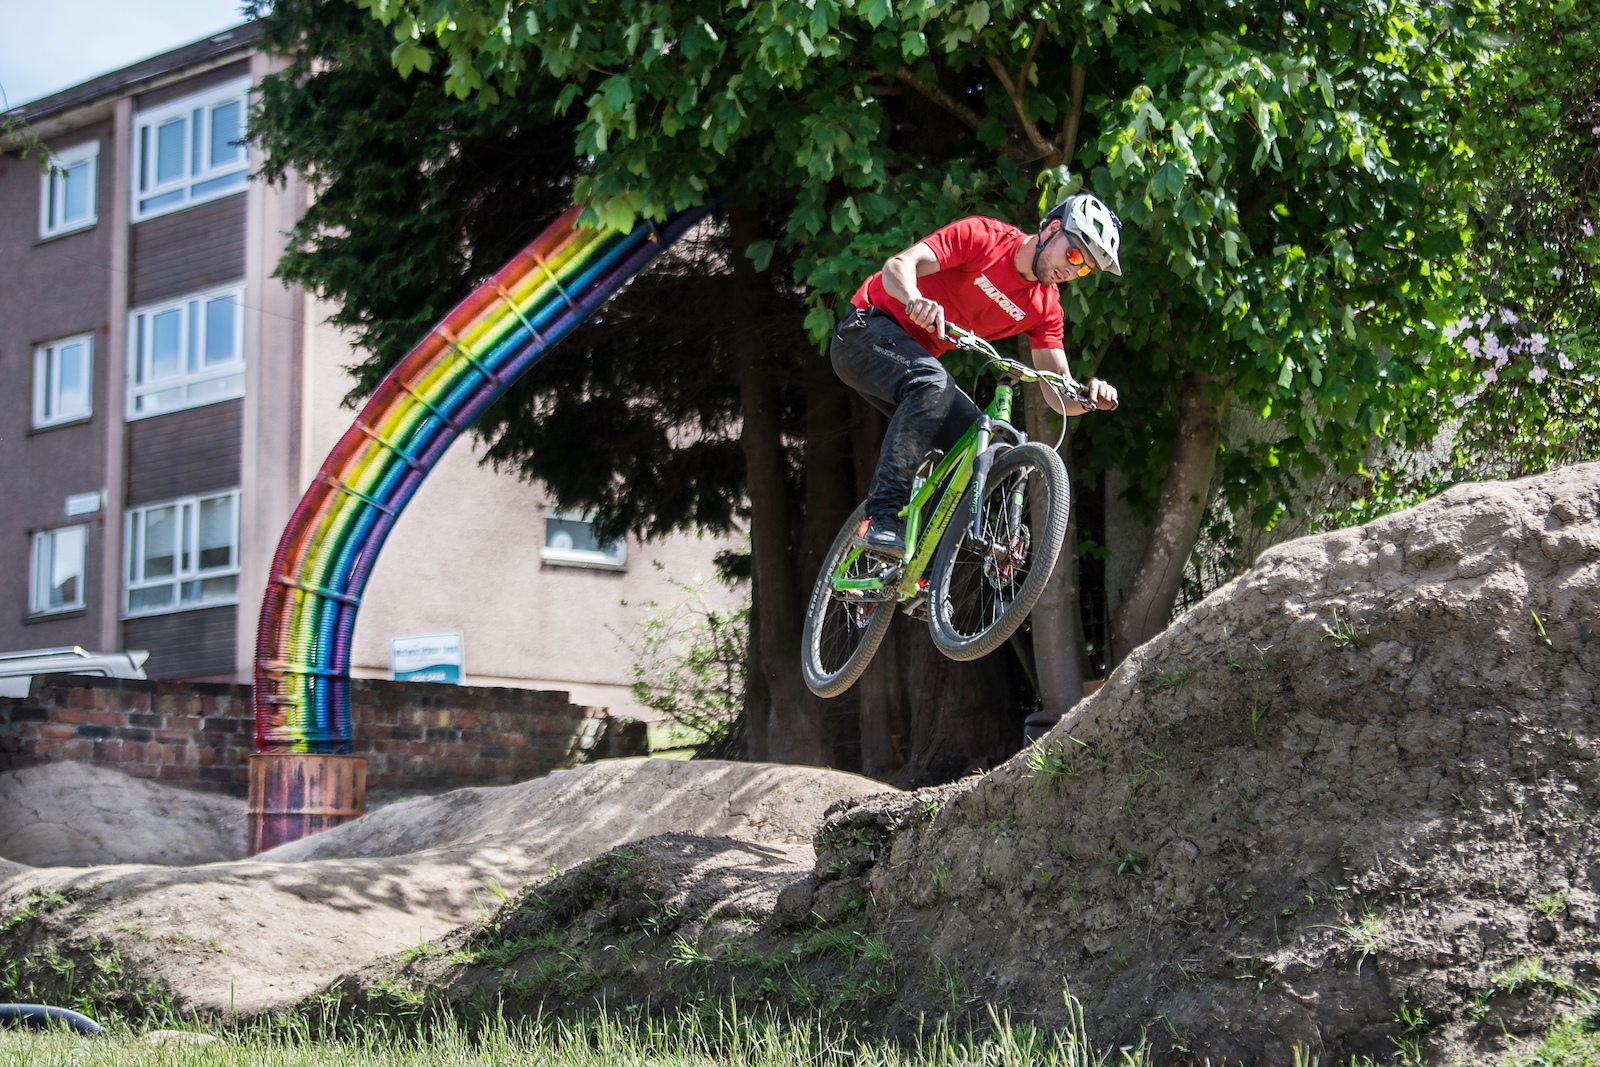 Bike crazy Ramsay MacFarlane, 34, from Glasgow, has spent 5 weeks during the lockdown building a 75 square meter pump track in his section of his back garden.